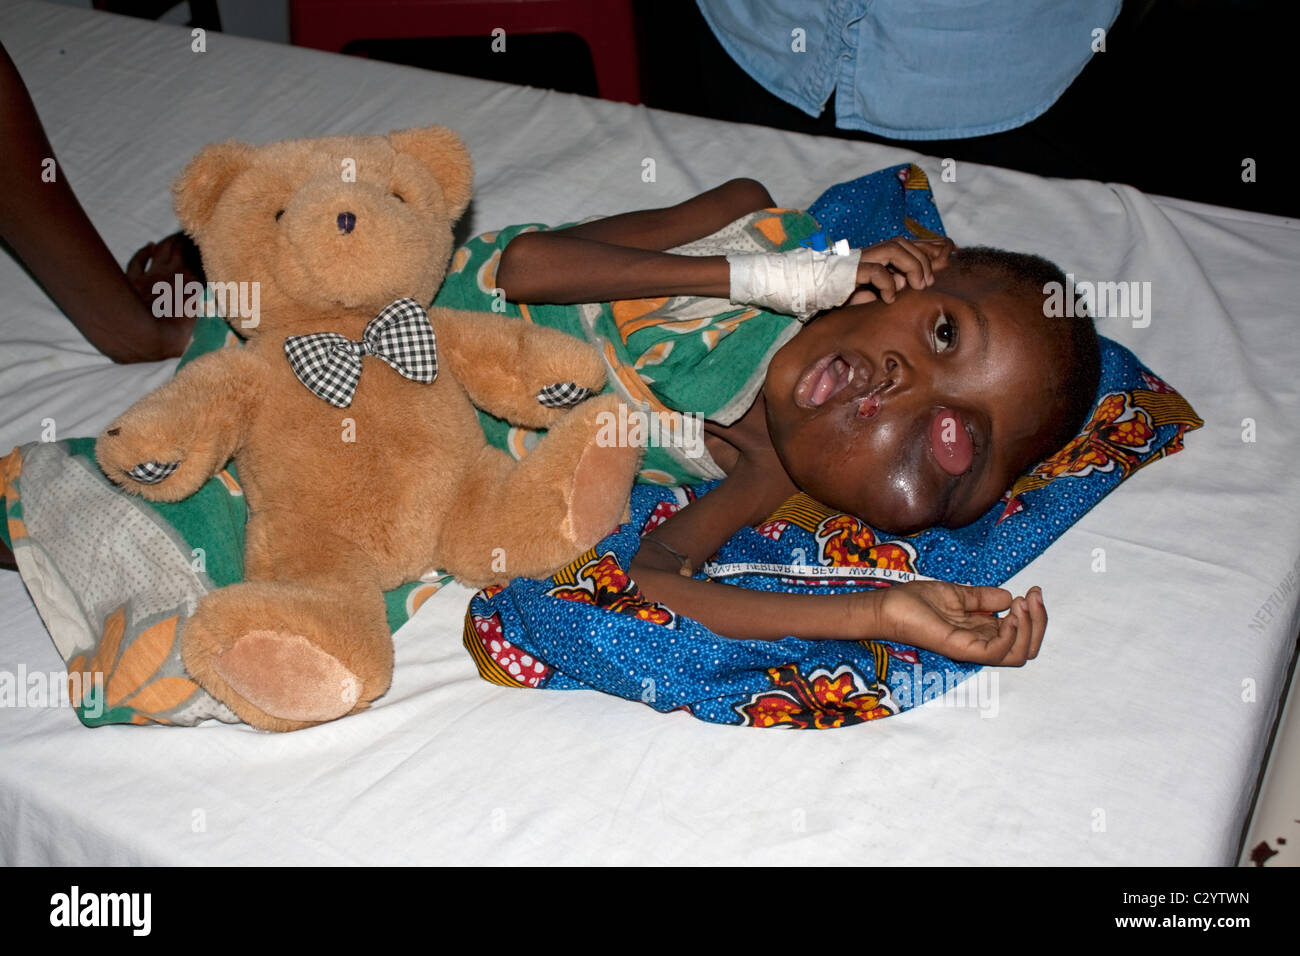 Young African boy with severe symptons of Burkitts cancer Coast Hospital Mombasa Kenya Stock Photo